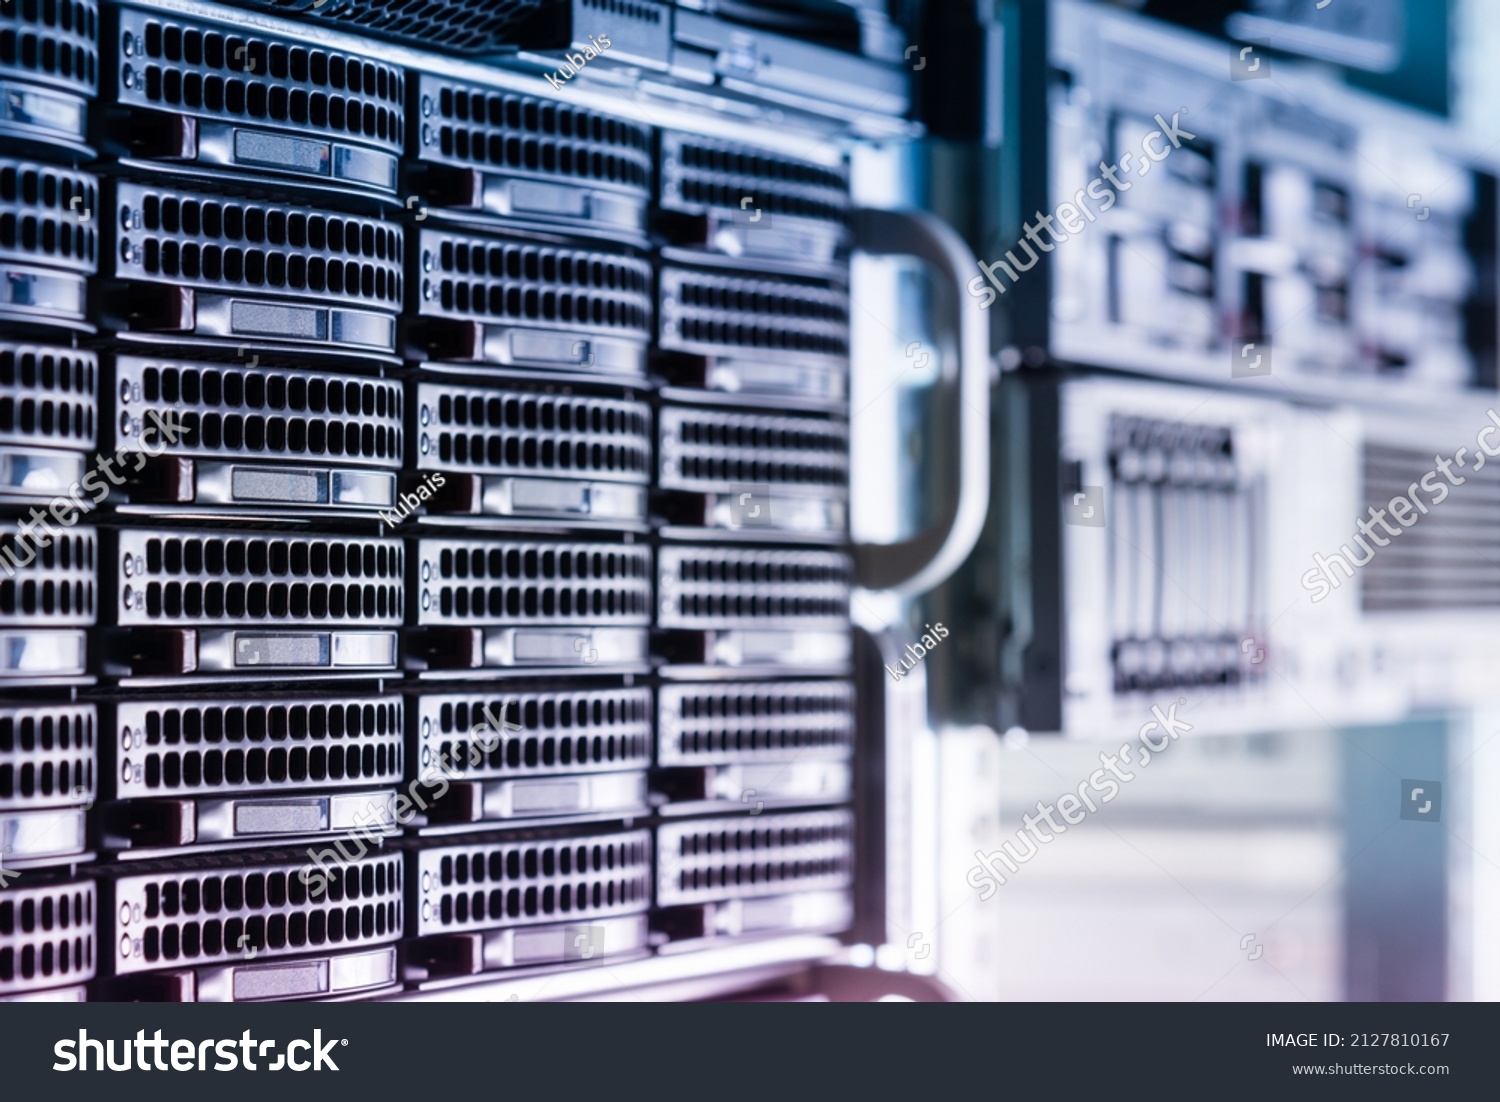 
Array of hard disks used for data storage in internet data center #2127810167